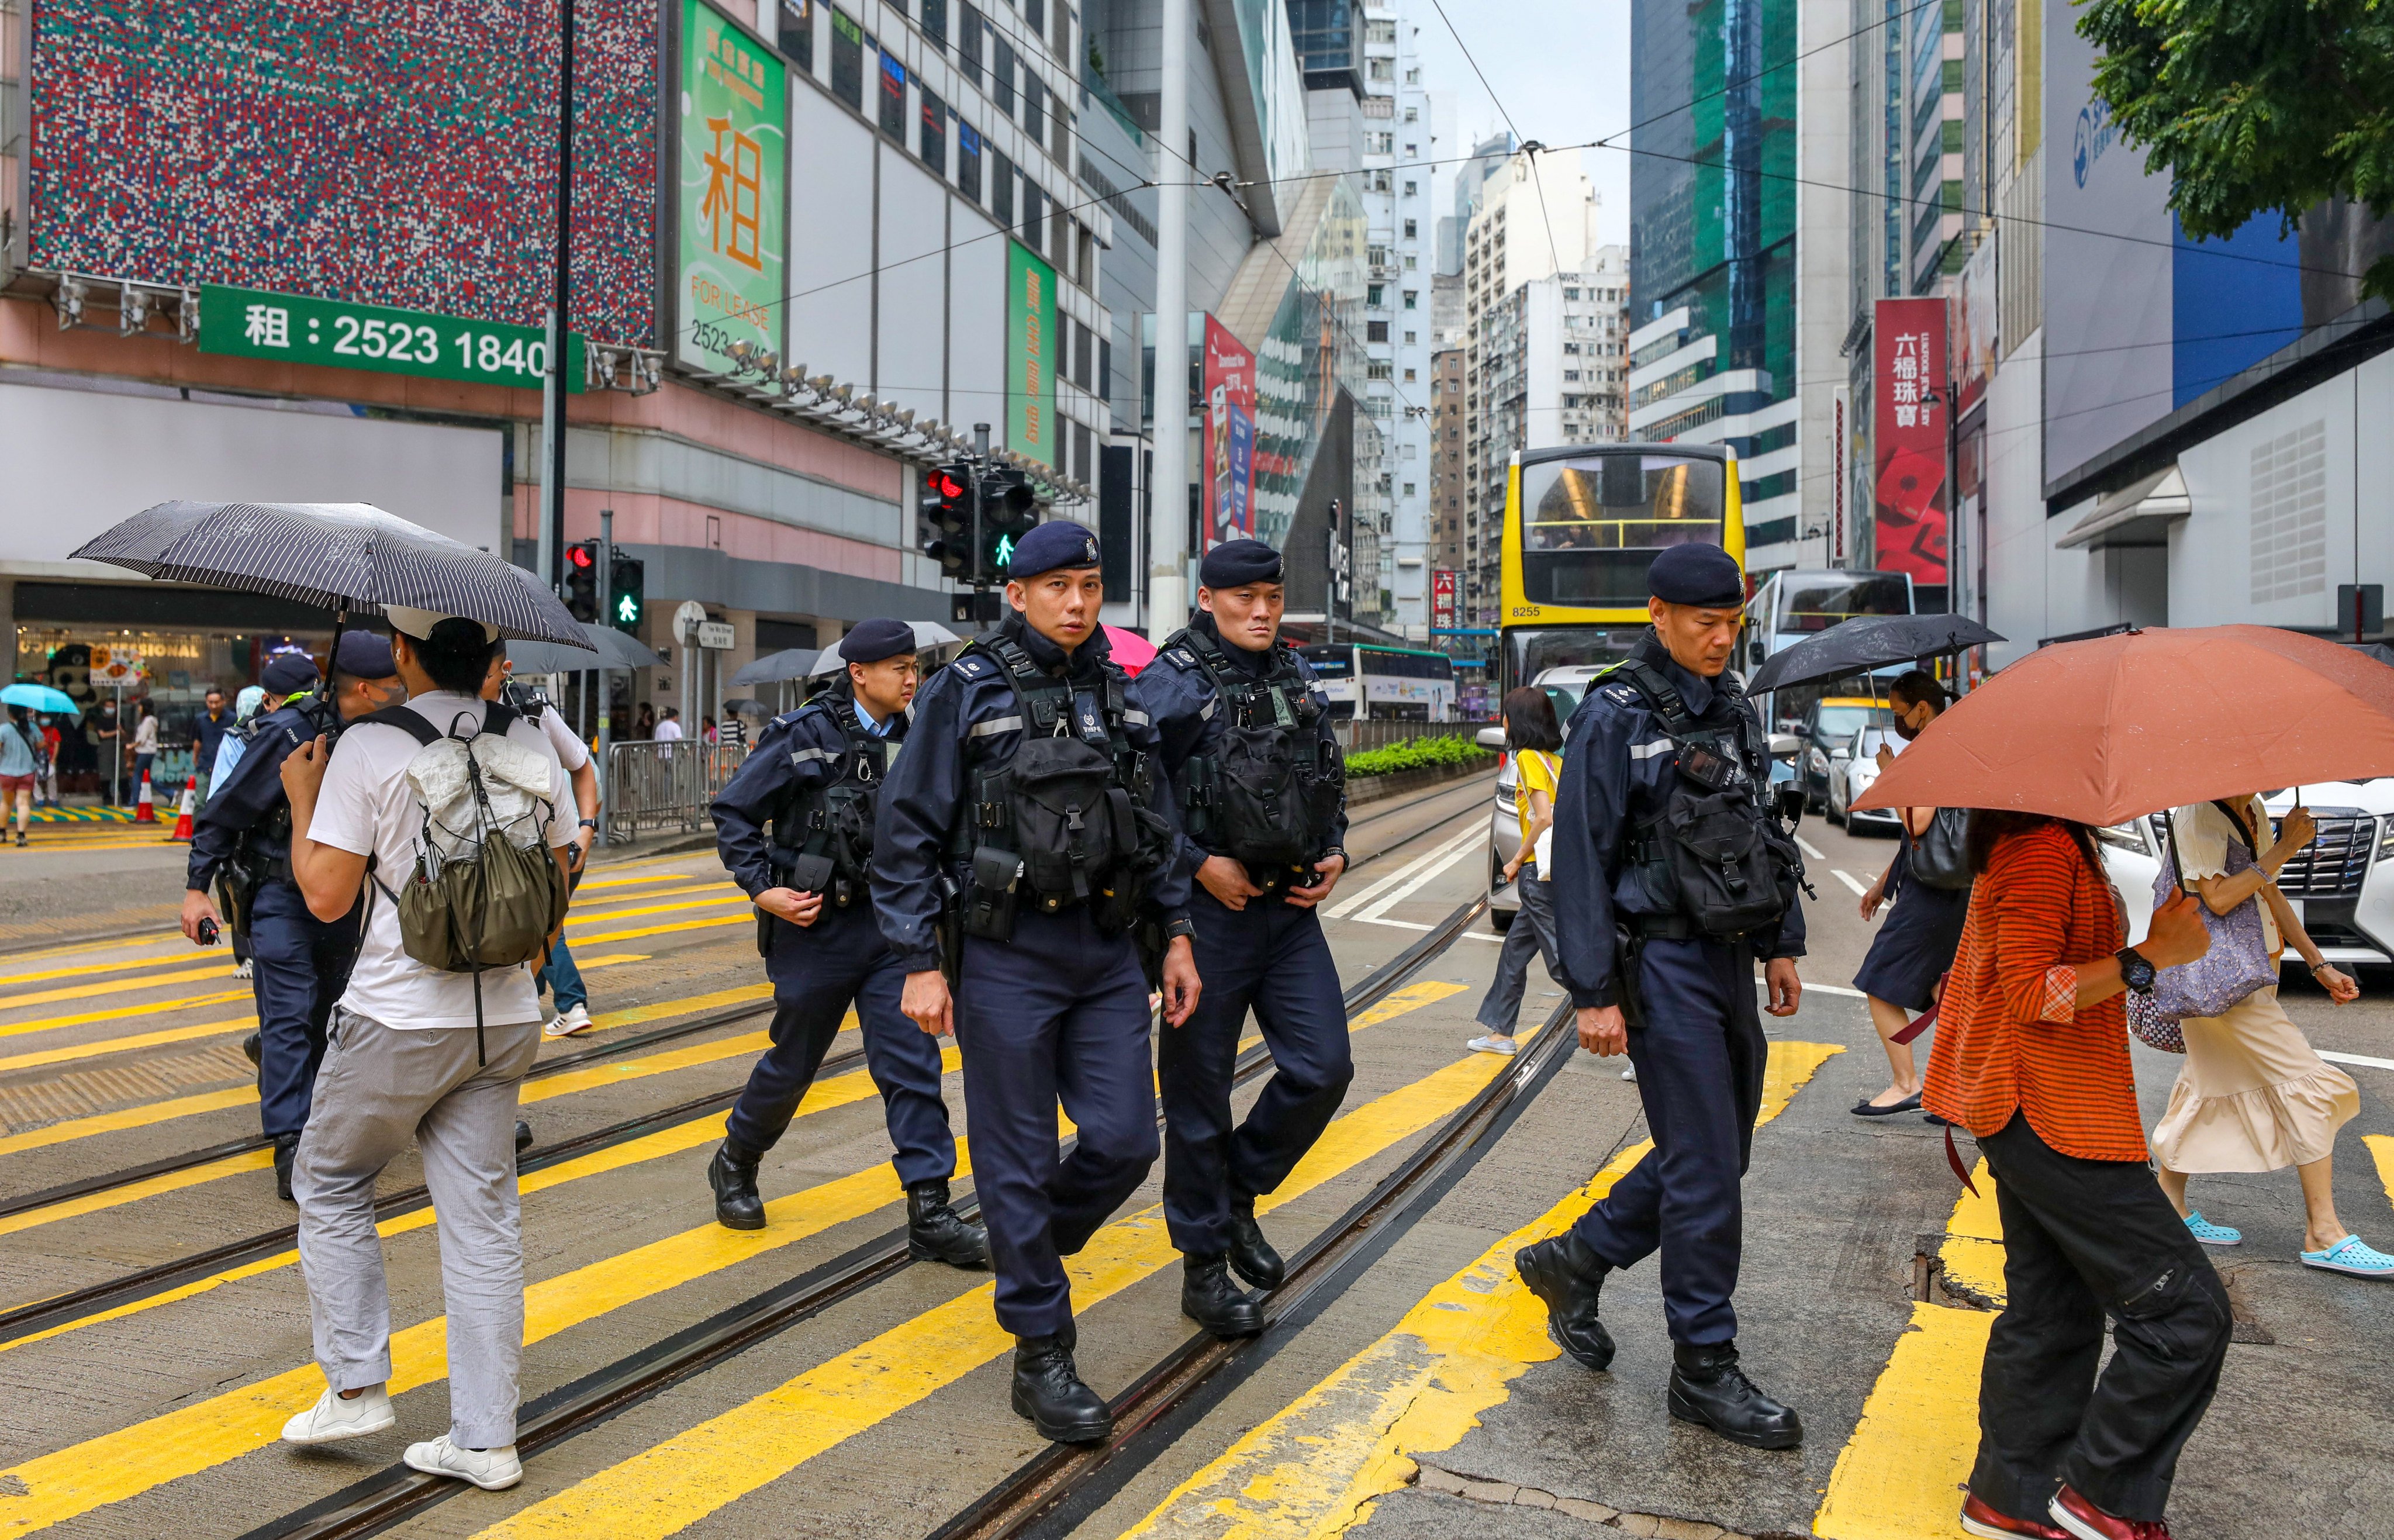 Hong Kong has made national security a top priority in recent years. Photo: Xiaomei Chen